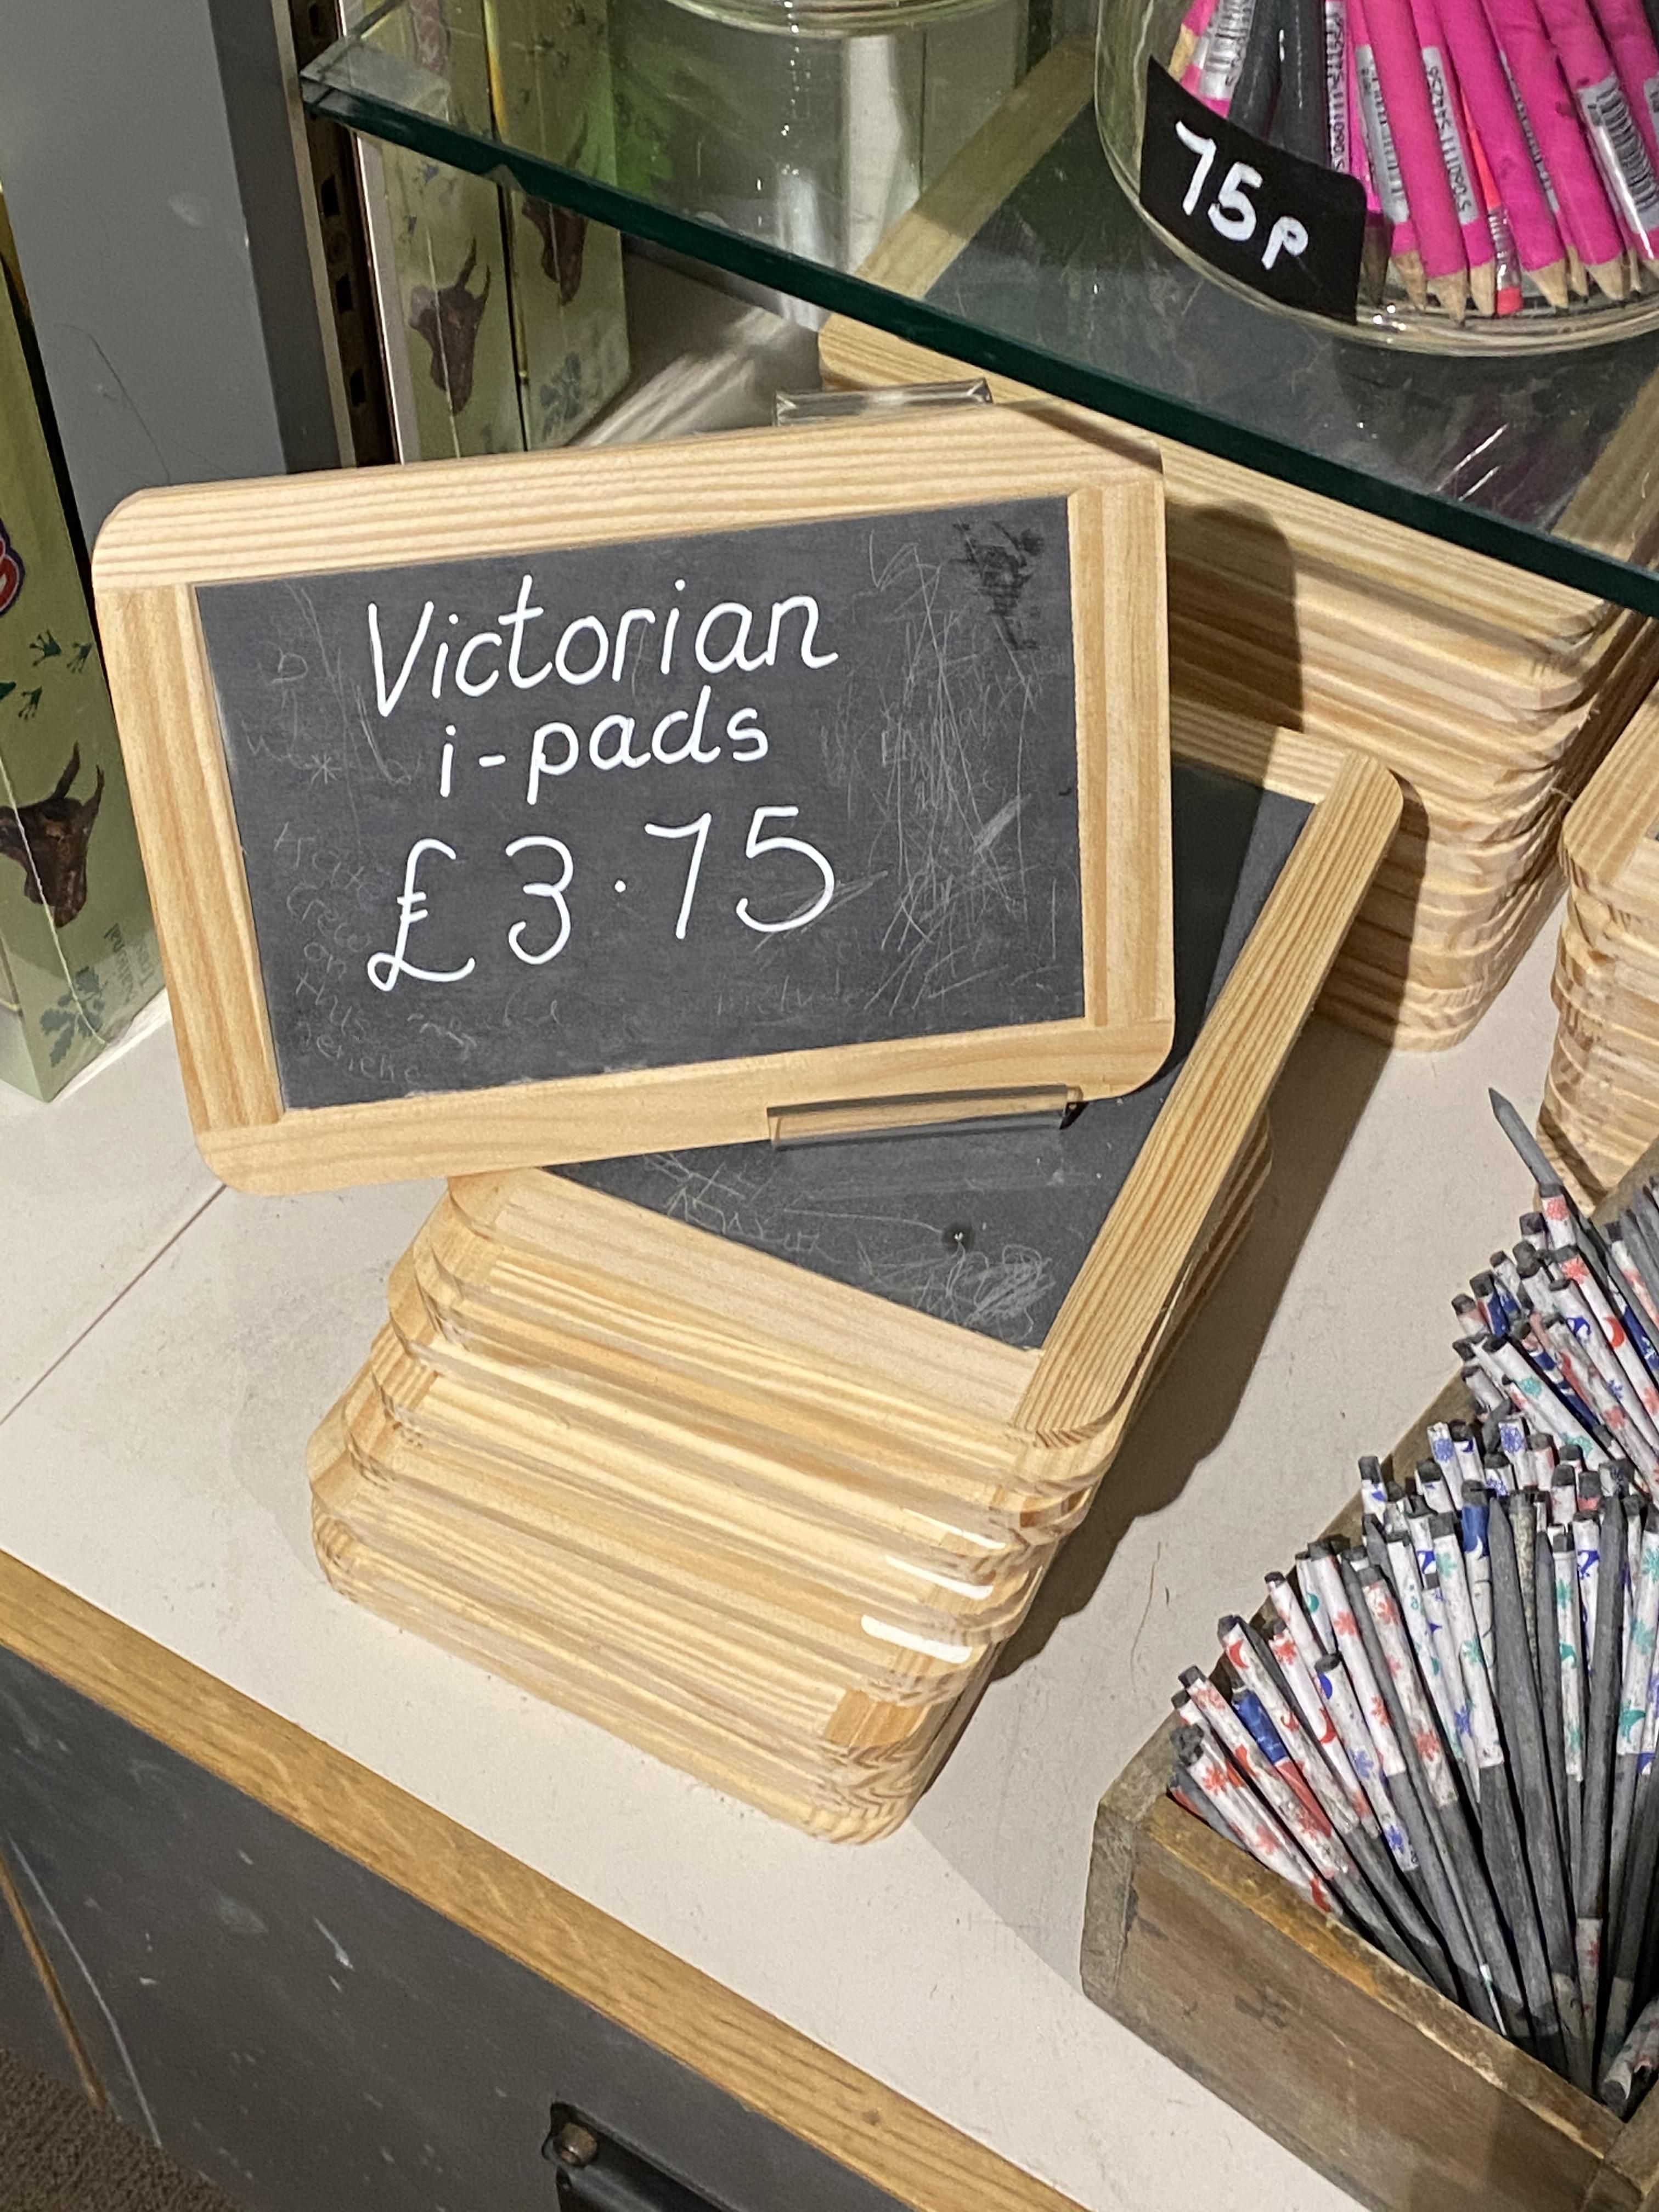 So, here in Britain gift shops are embracing the wave of popularity for tech gifts.